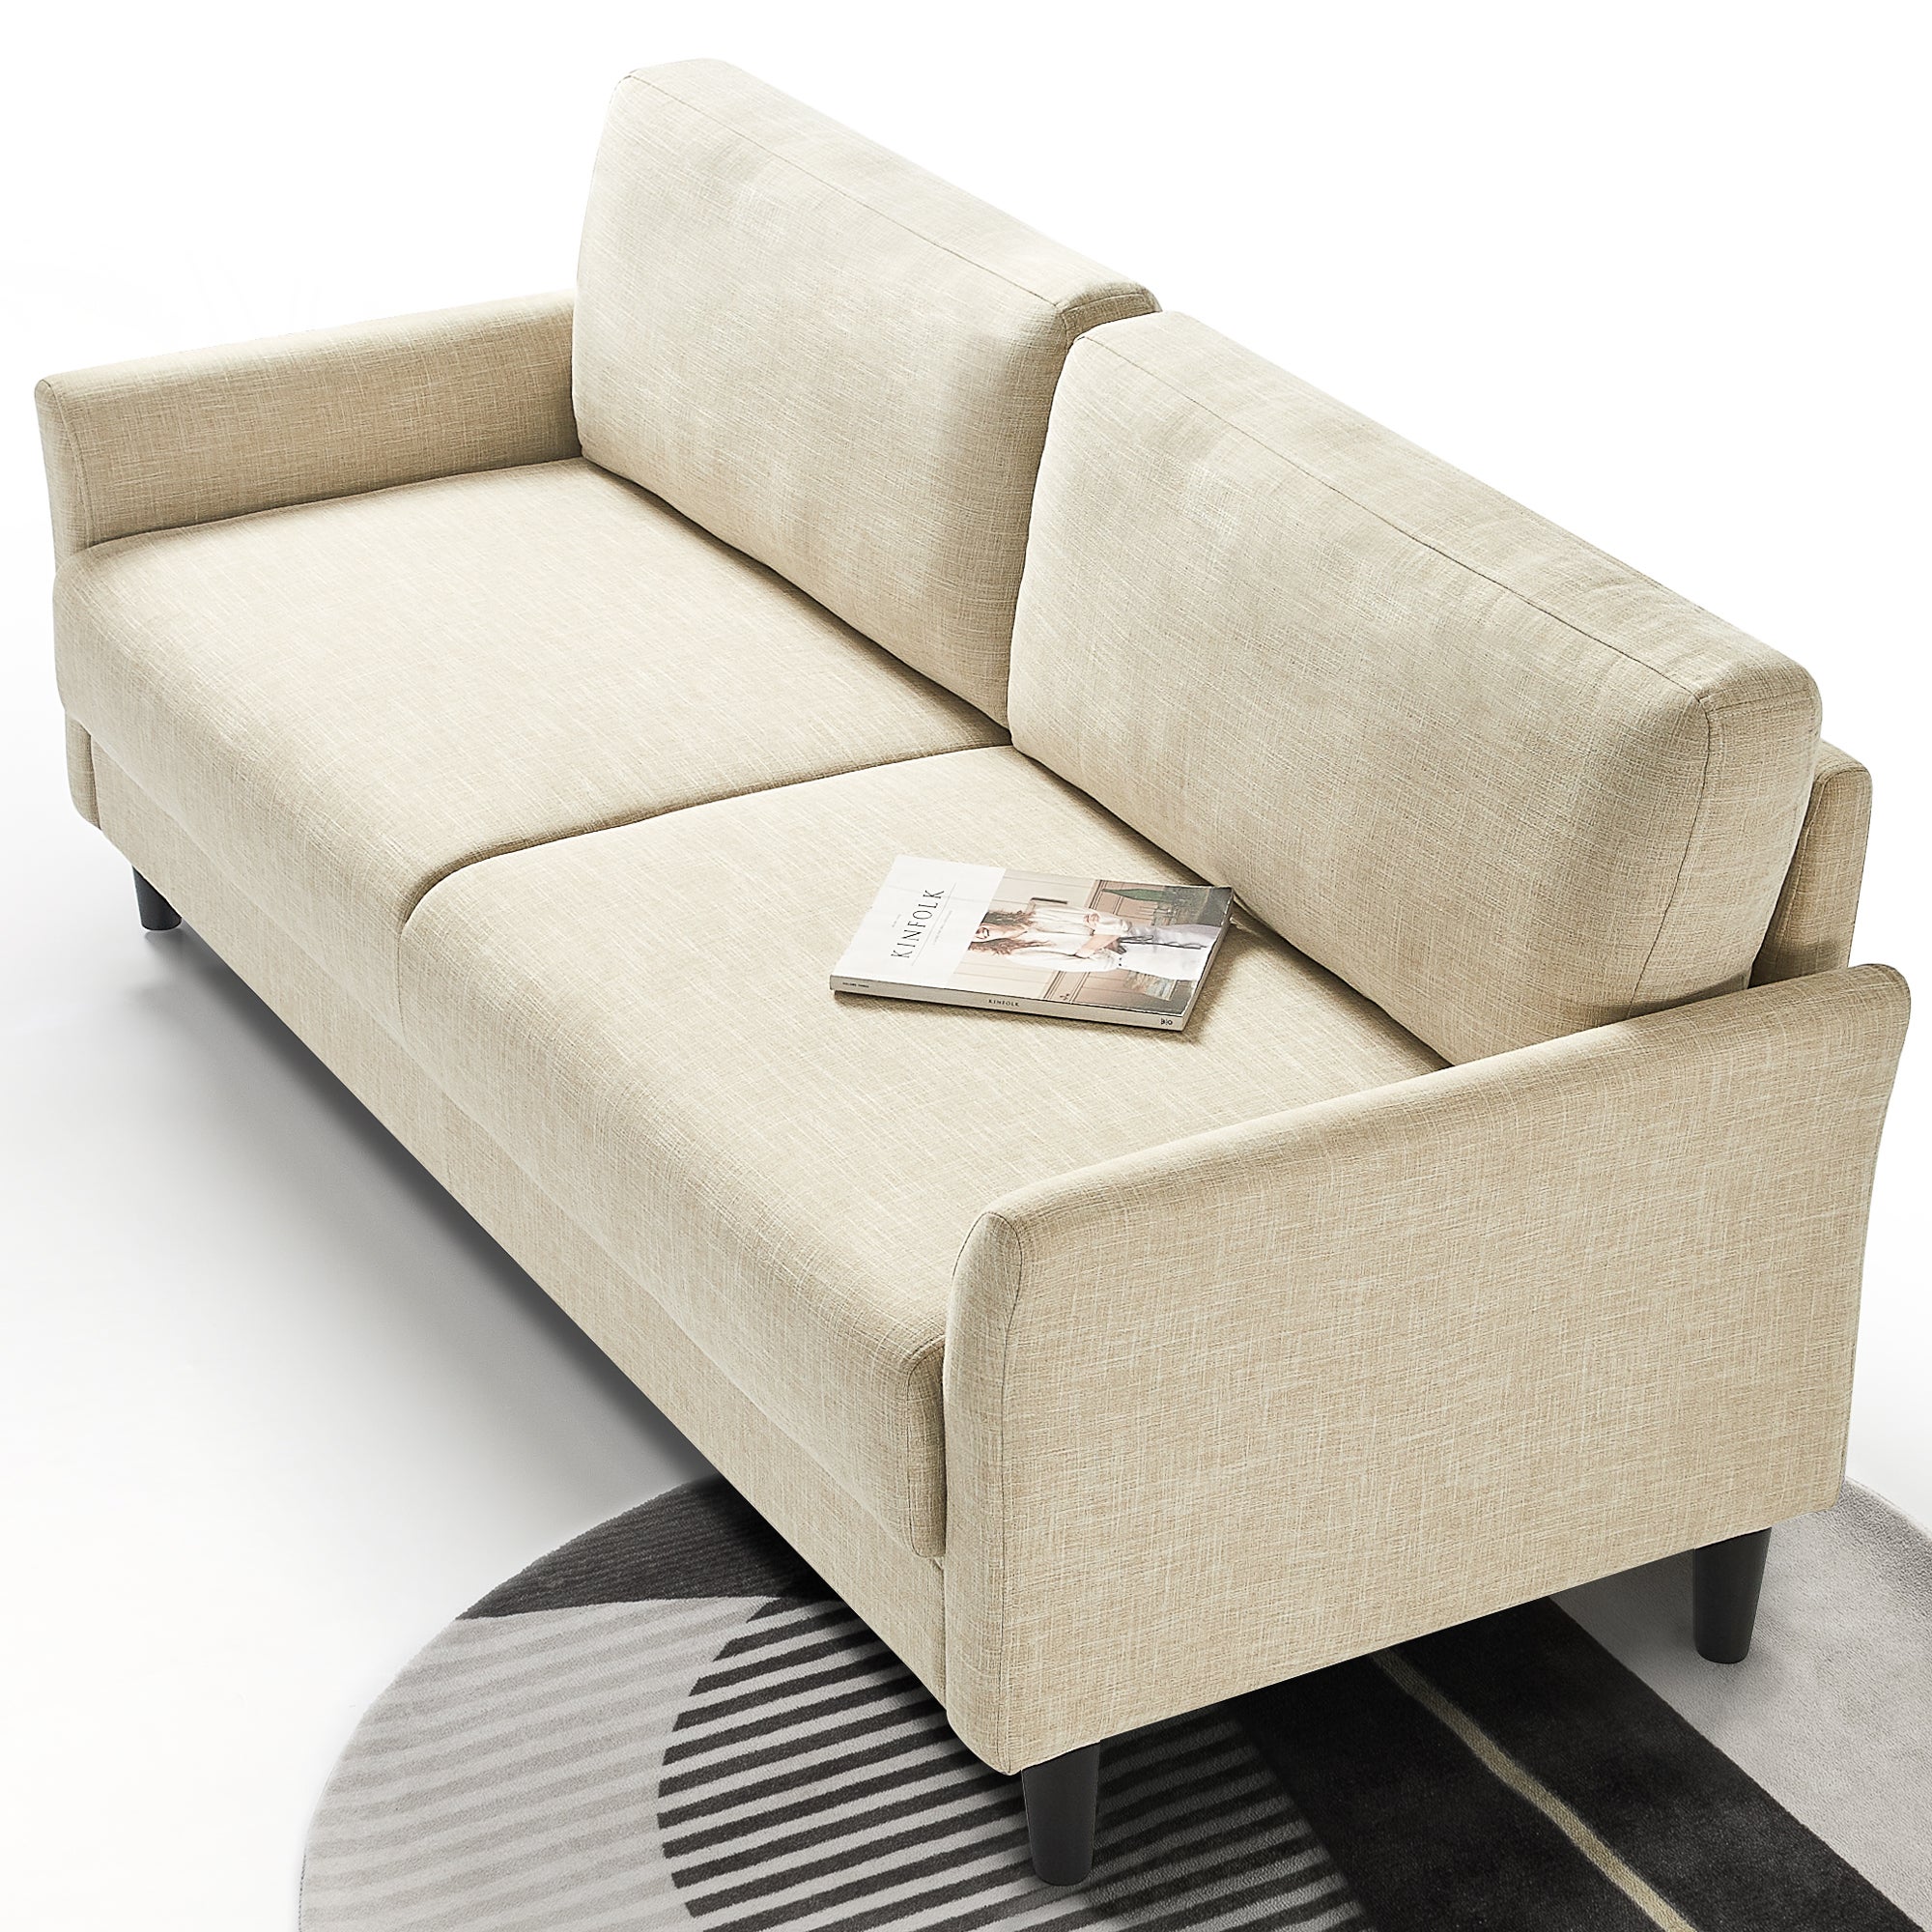 Zinus Jackie 3 Seater Sofa Couch - Beige